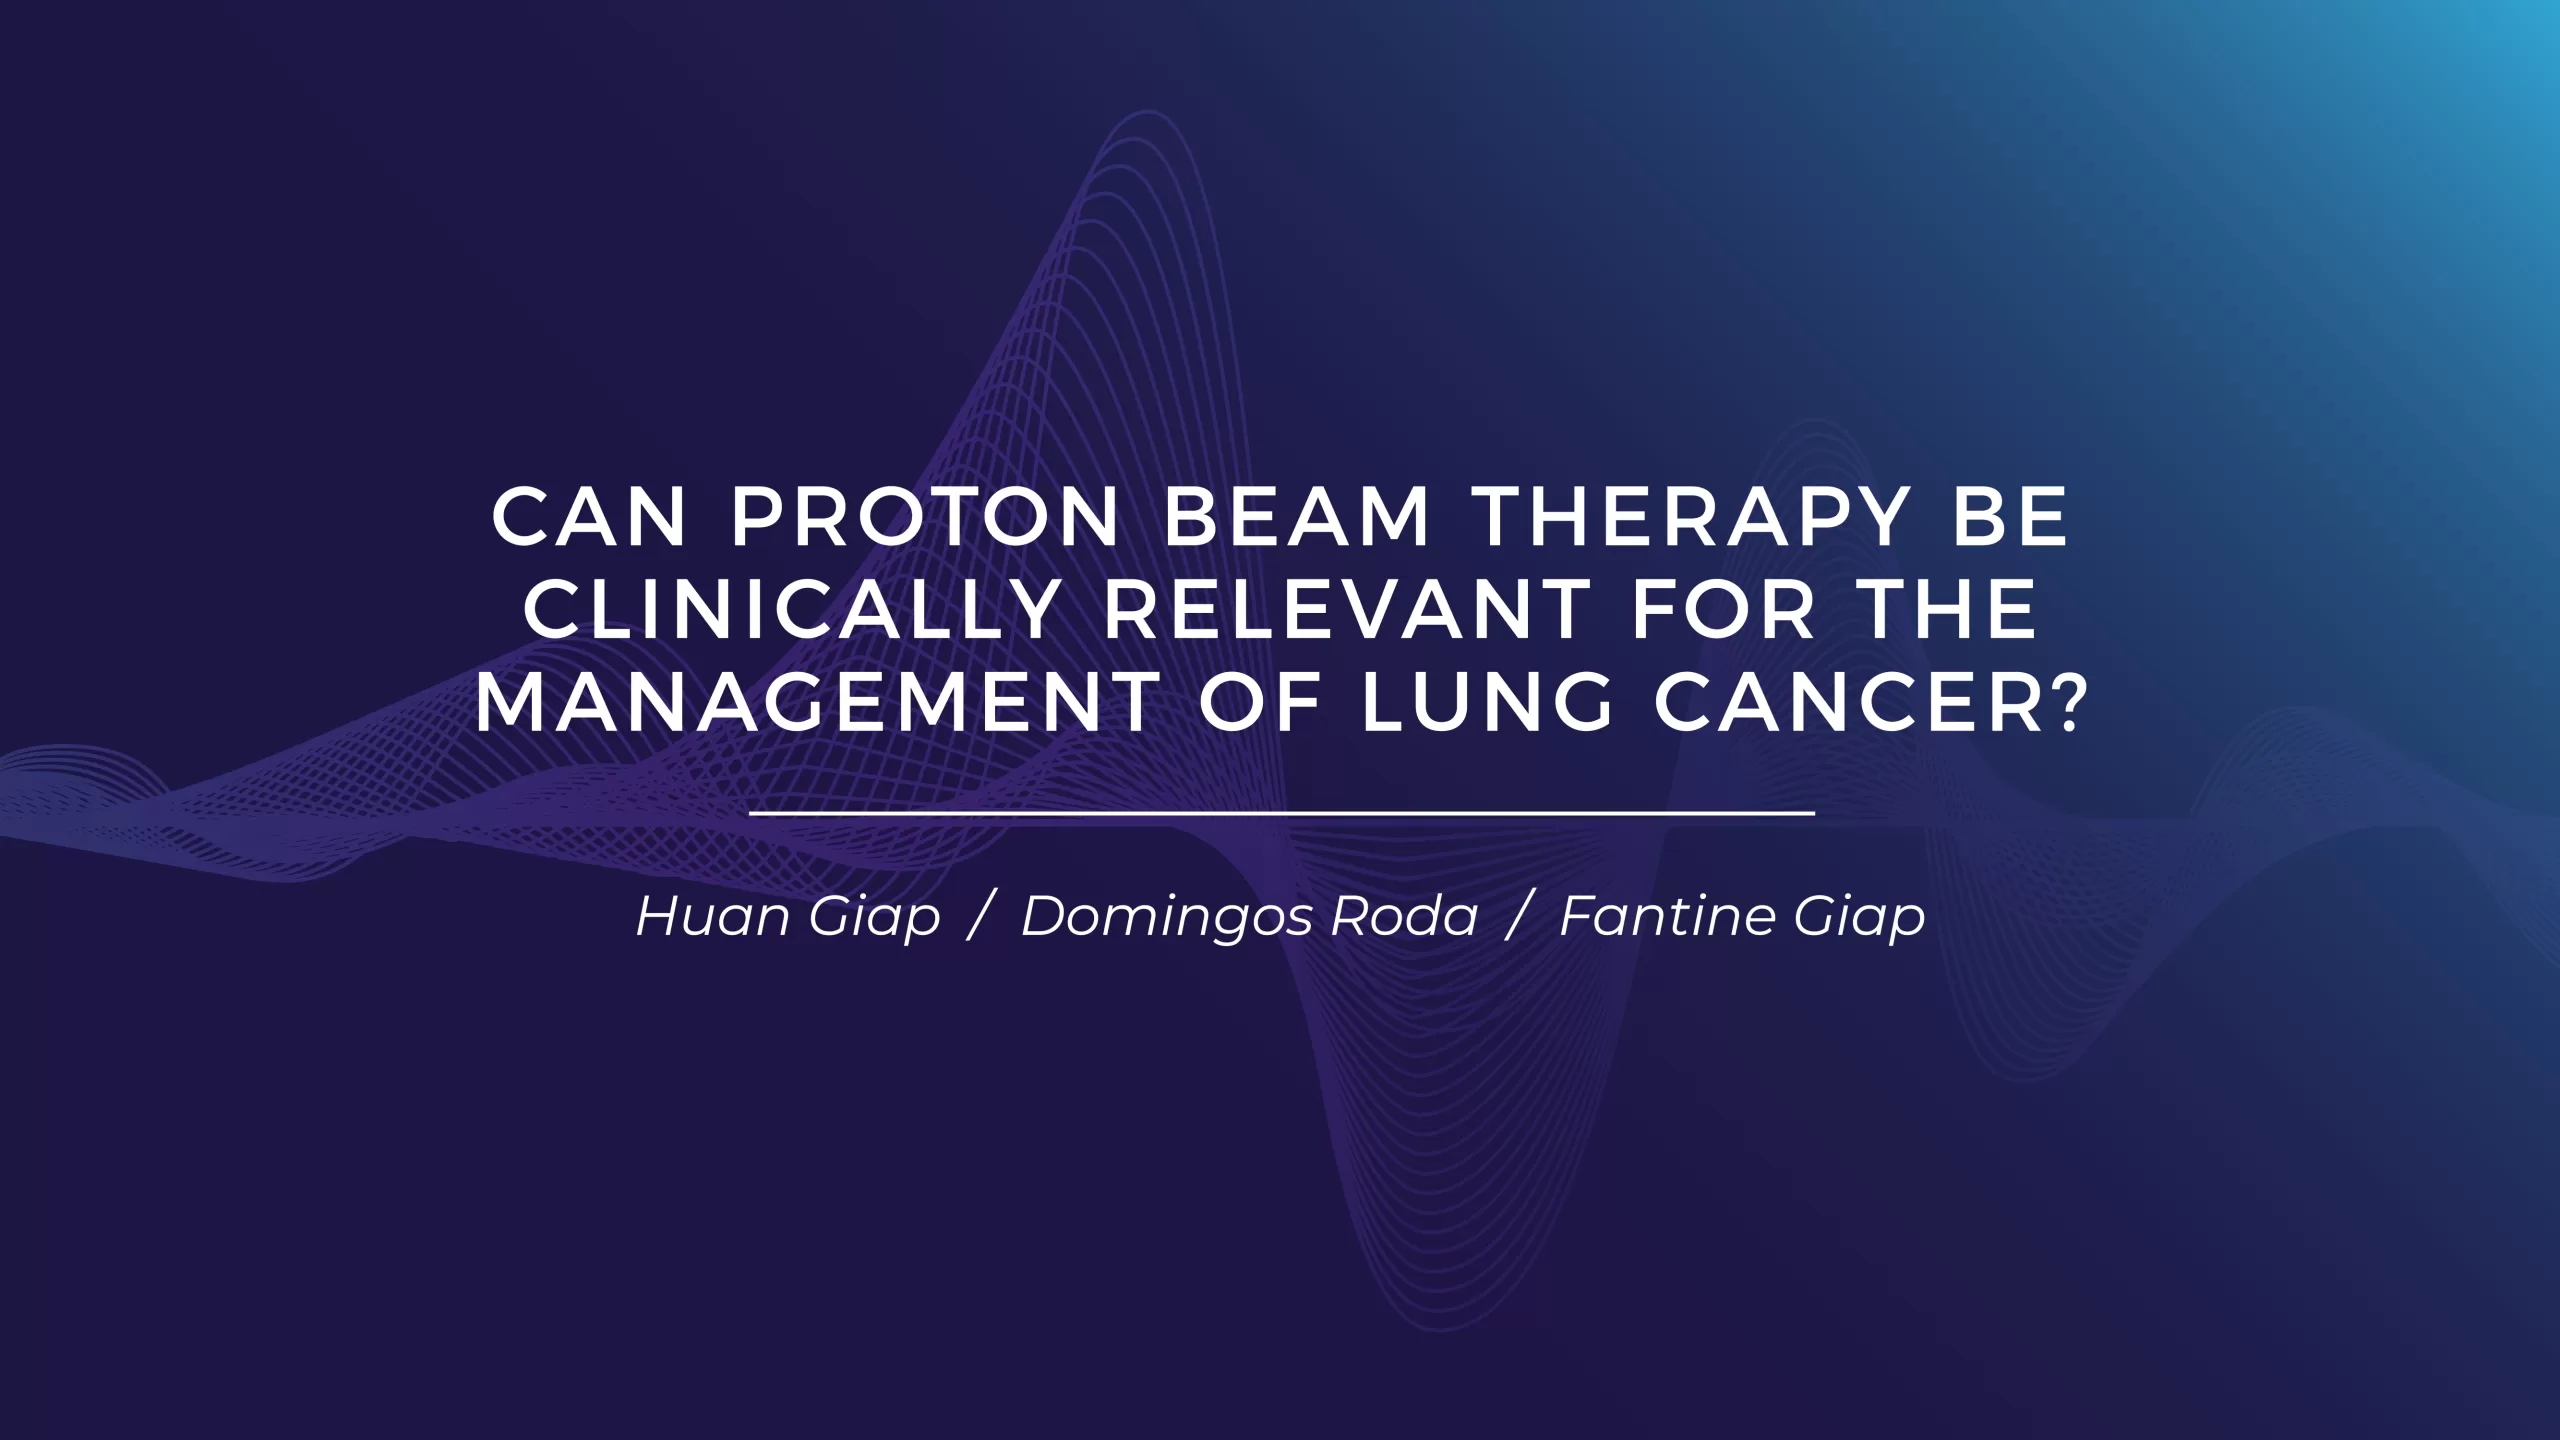 "Can Proton Beam Therapy Be Clinically Relevant for the Management of Lung Cancer?"